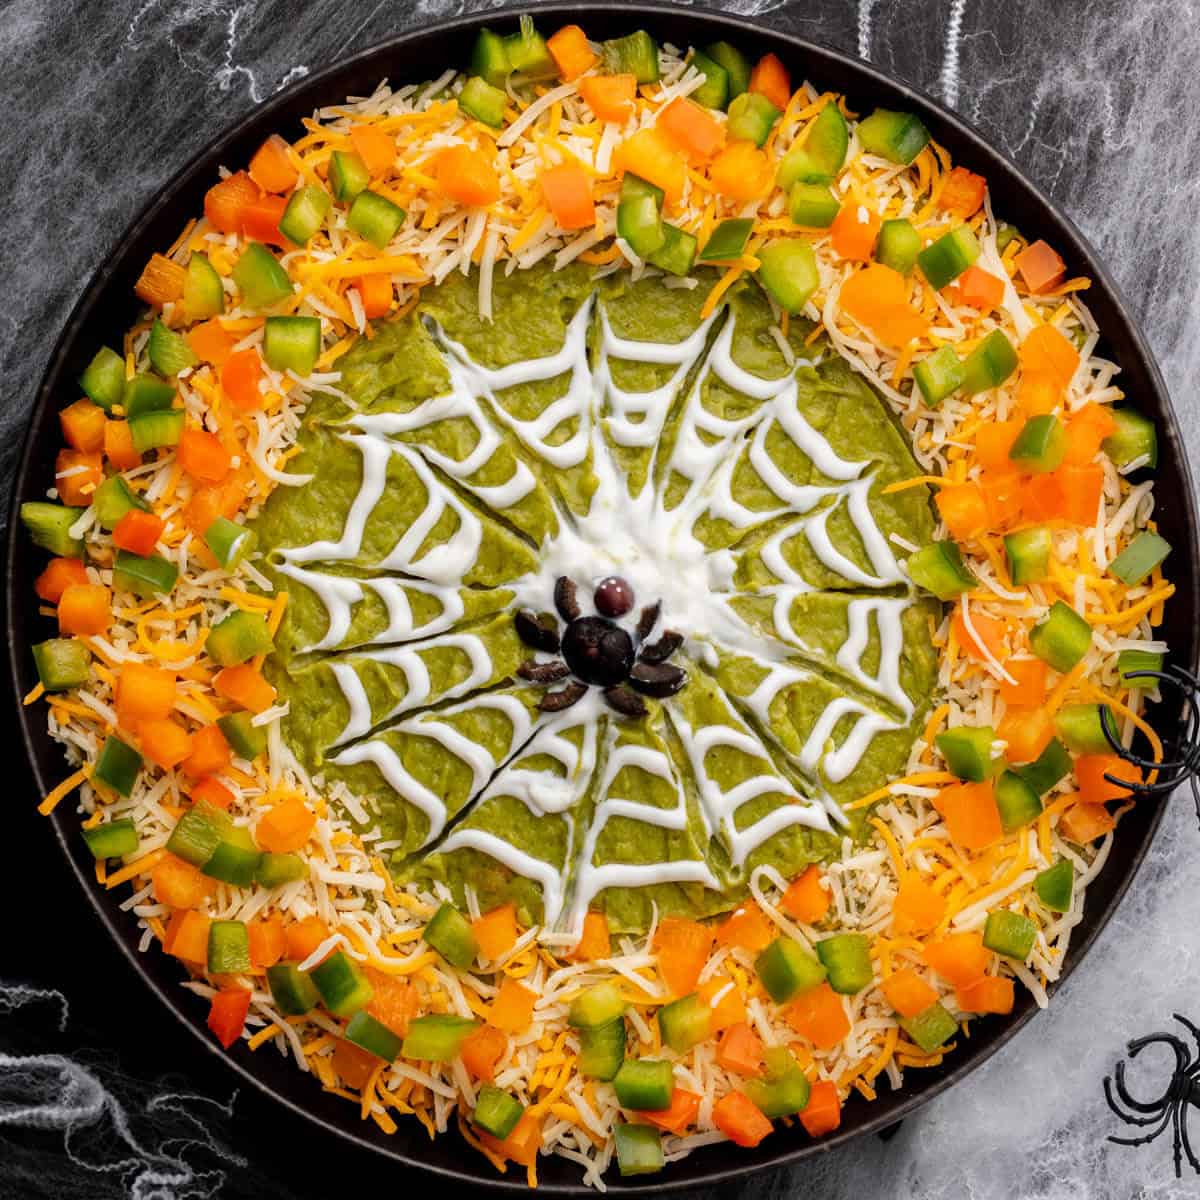 A black bowl containing layered Spider Web Dip decorated with shredded cheese, bell peppers and a sour cream spider web and spiders.